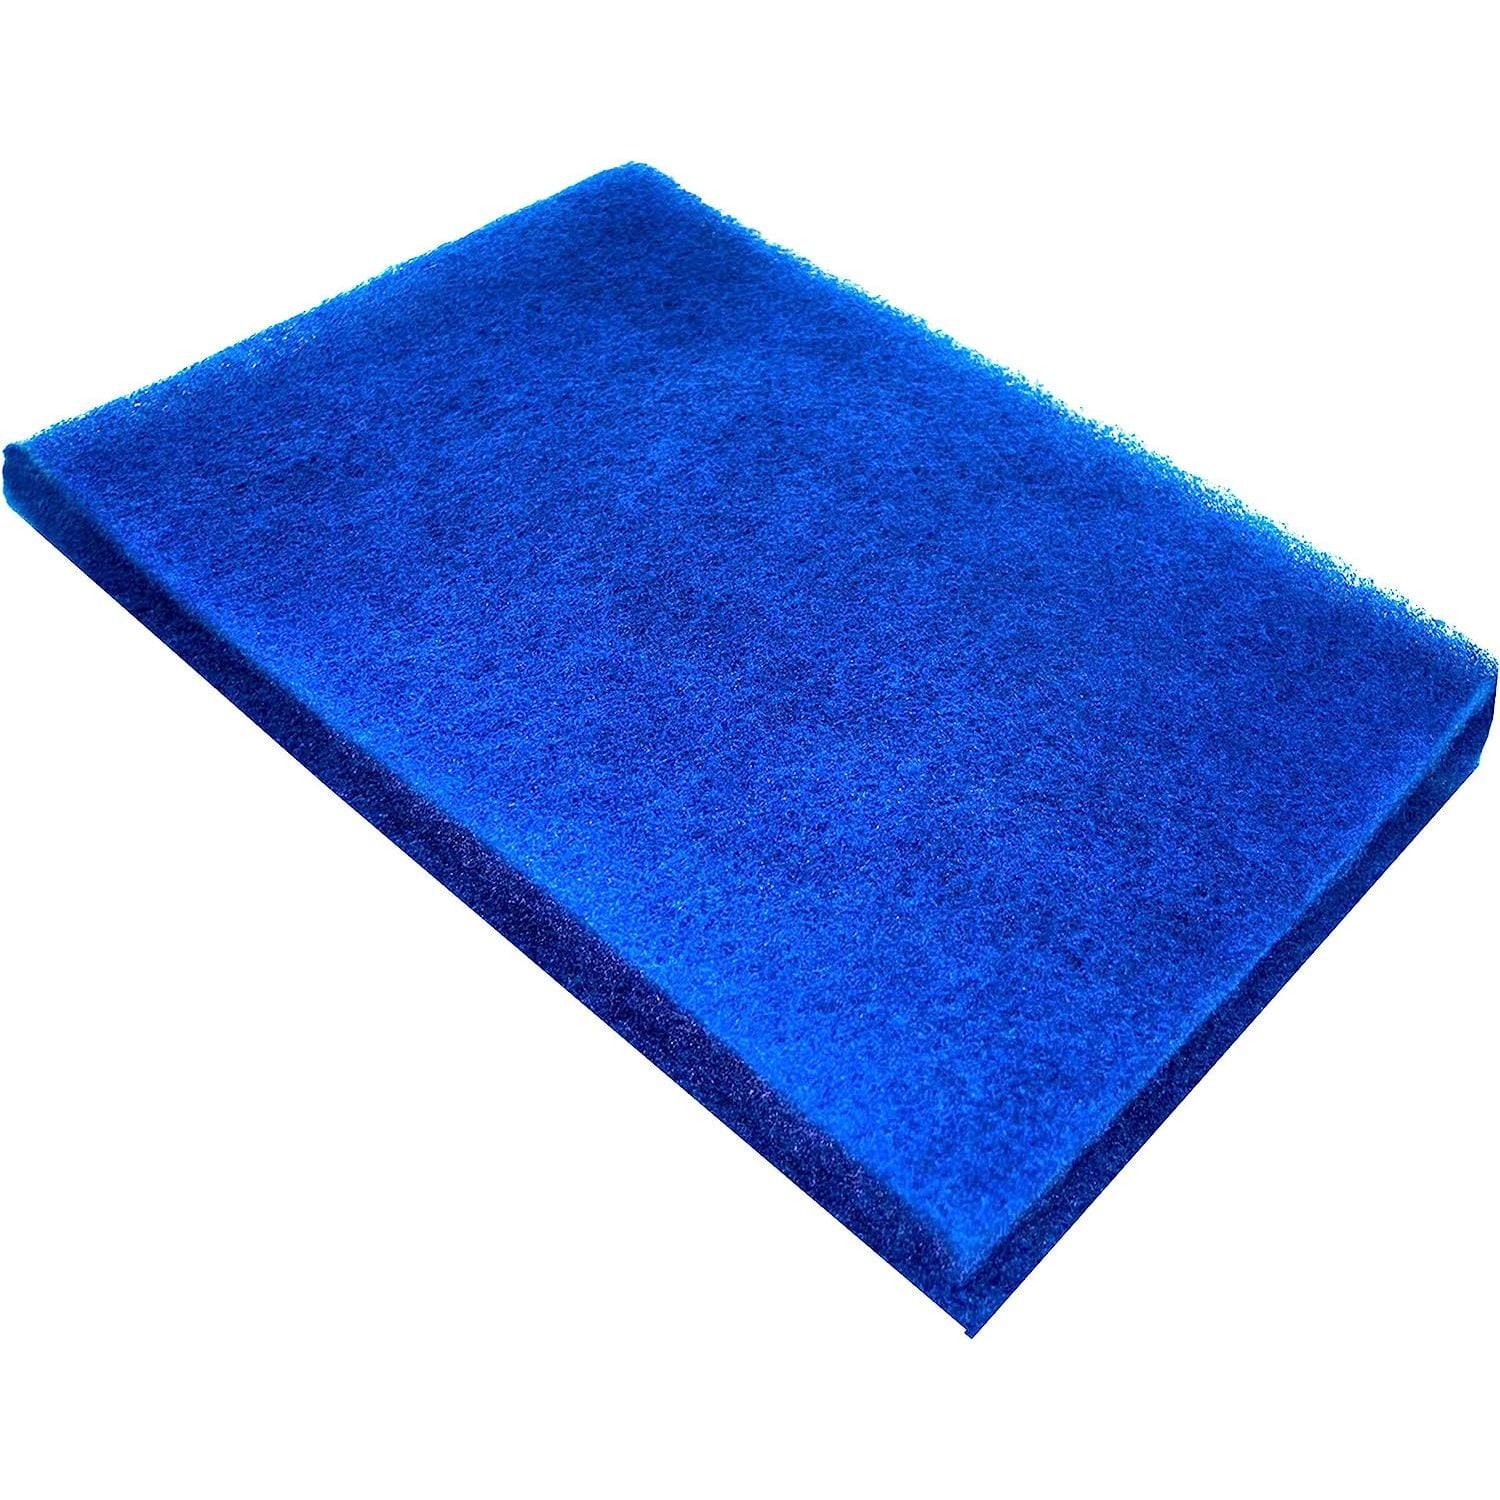 Clean-Link Washable Air Filter Cloth / Blue and White Air Filter